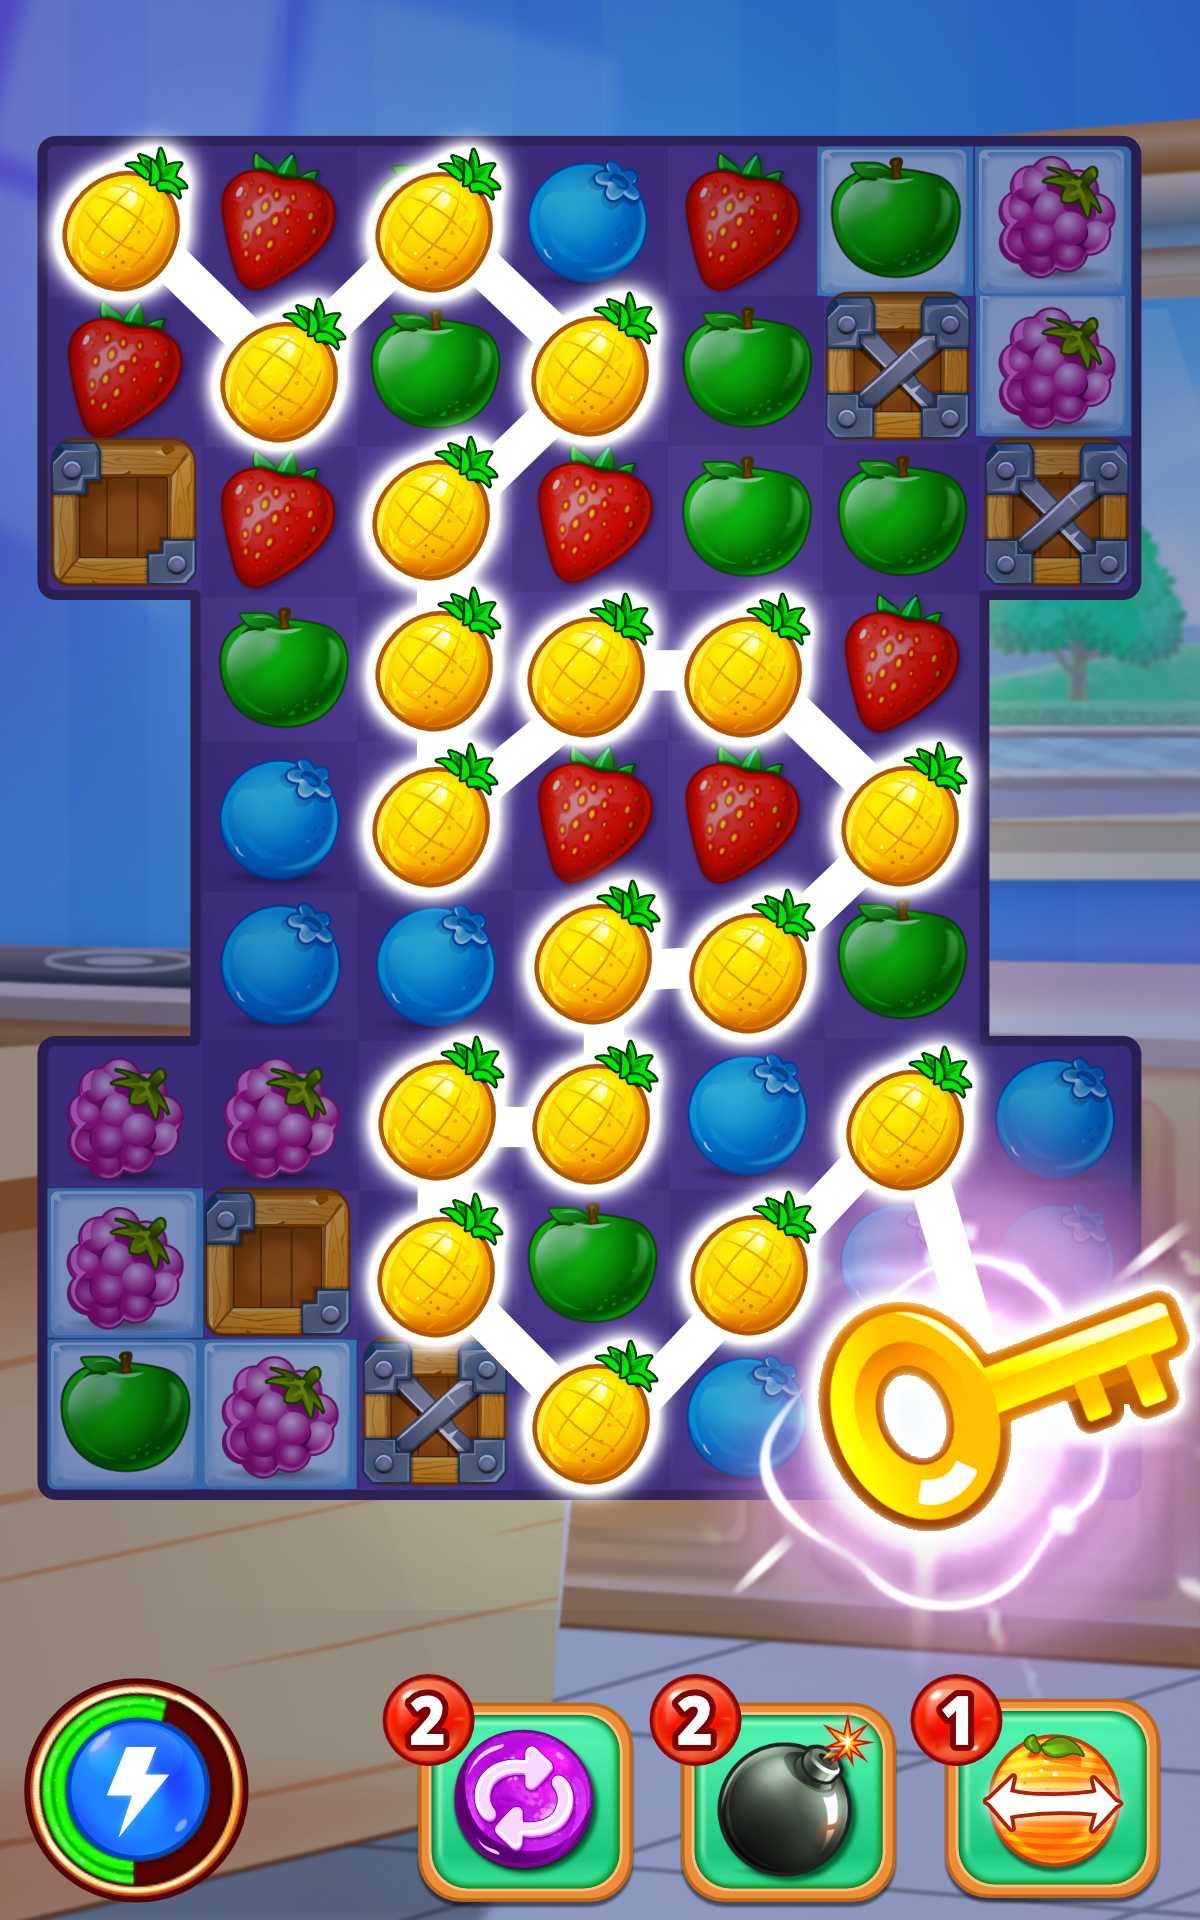 Balloon Paradise - Match 3 Puzzle Game for ios instal free